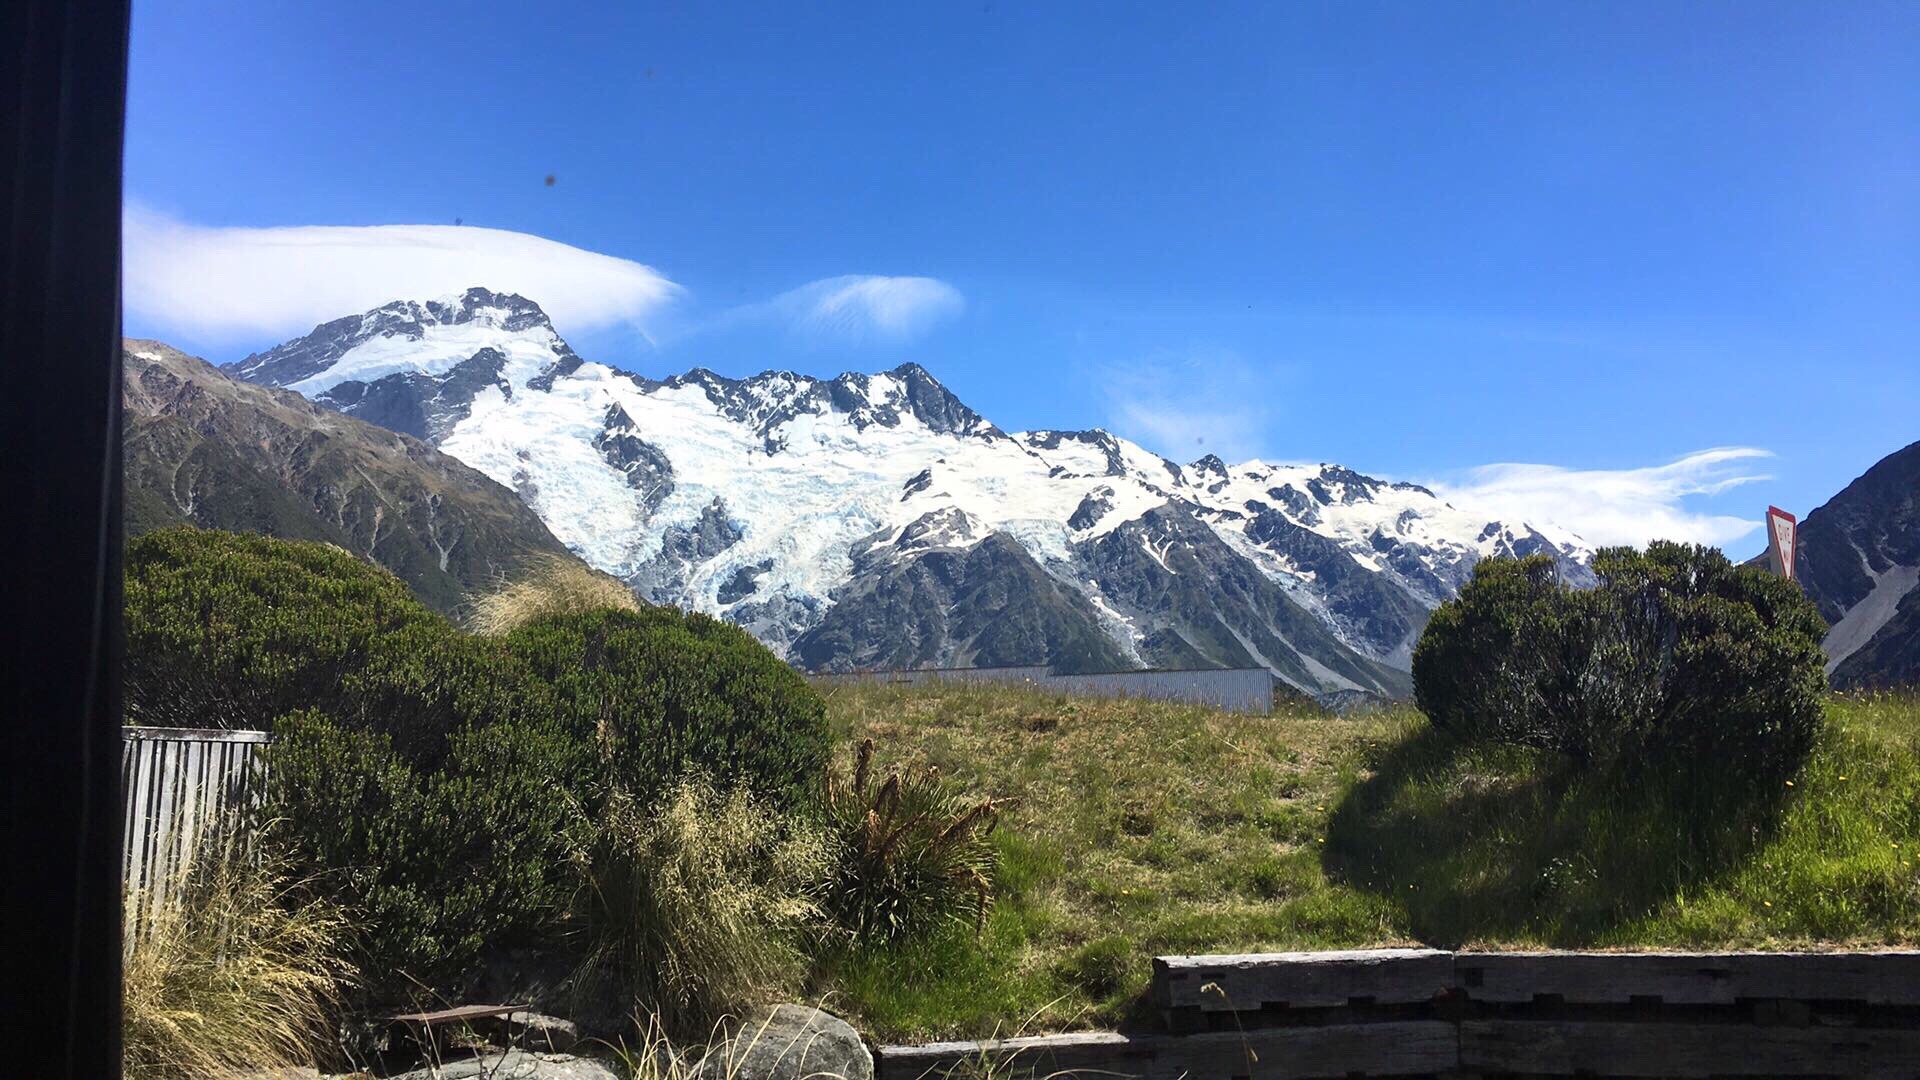 Three Day Itinerary for Aoraki/Mount Cook National Park